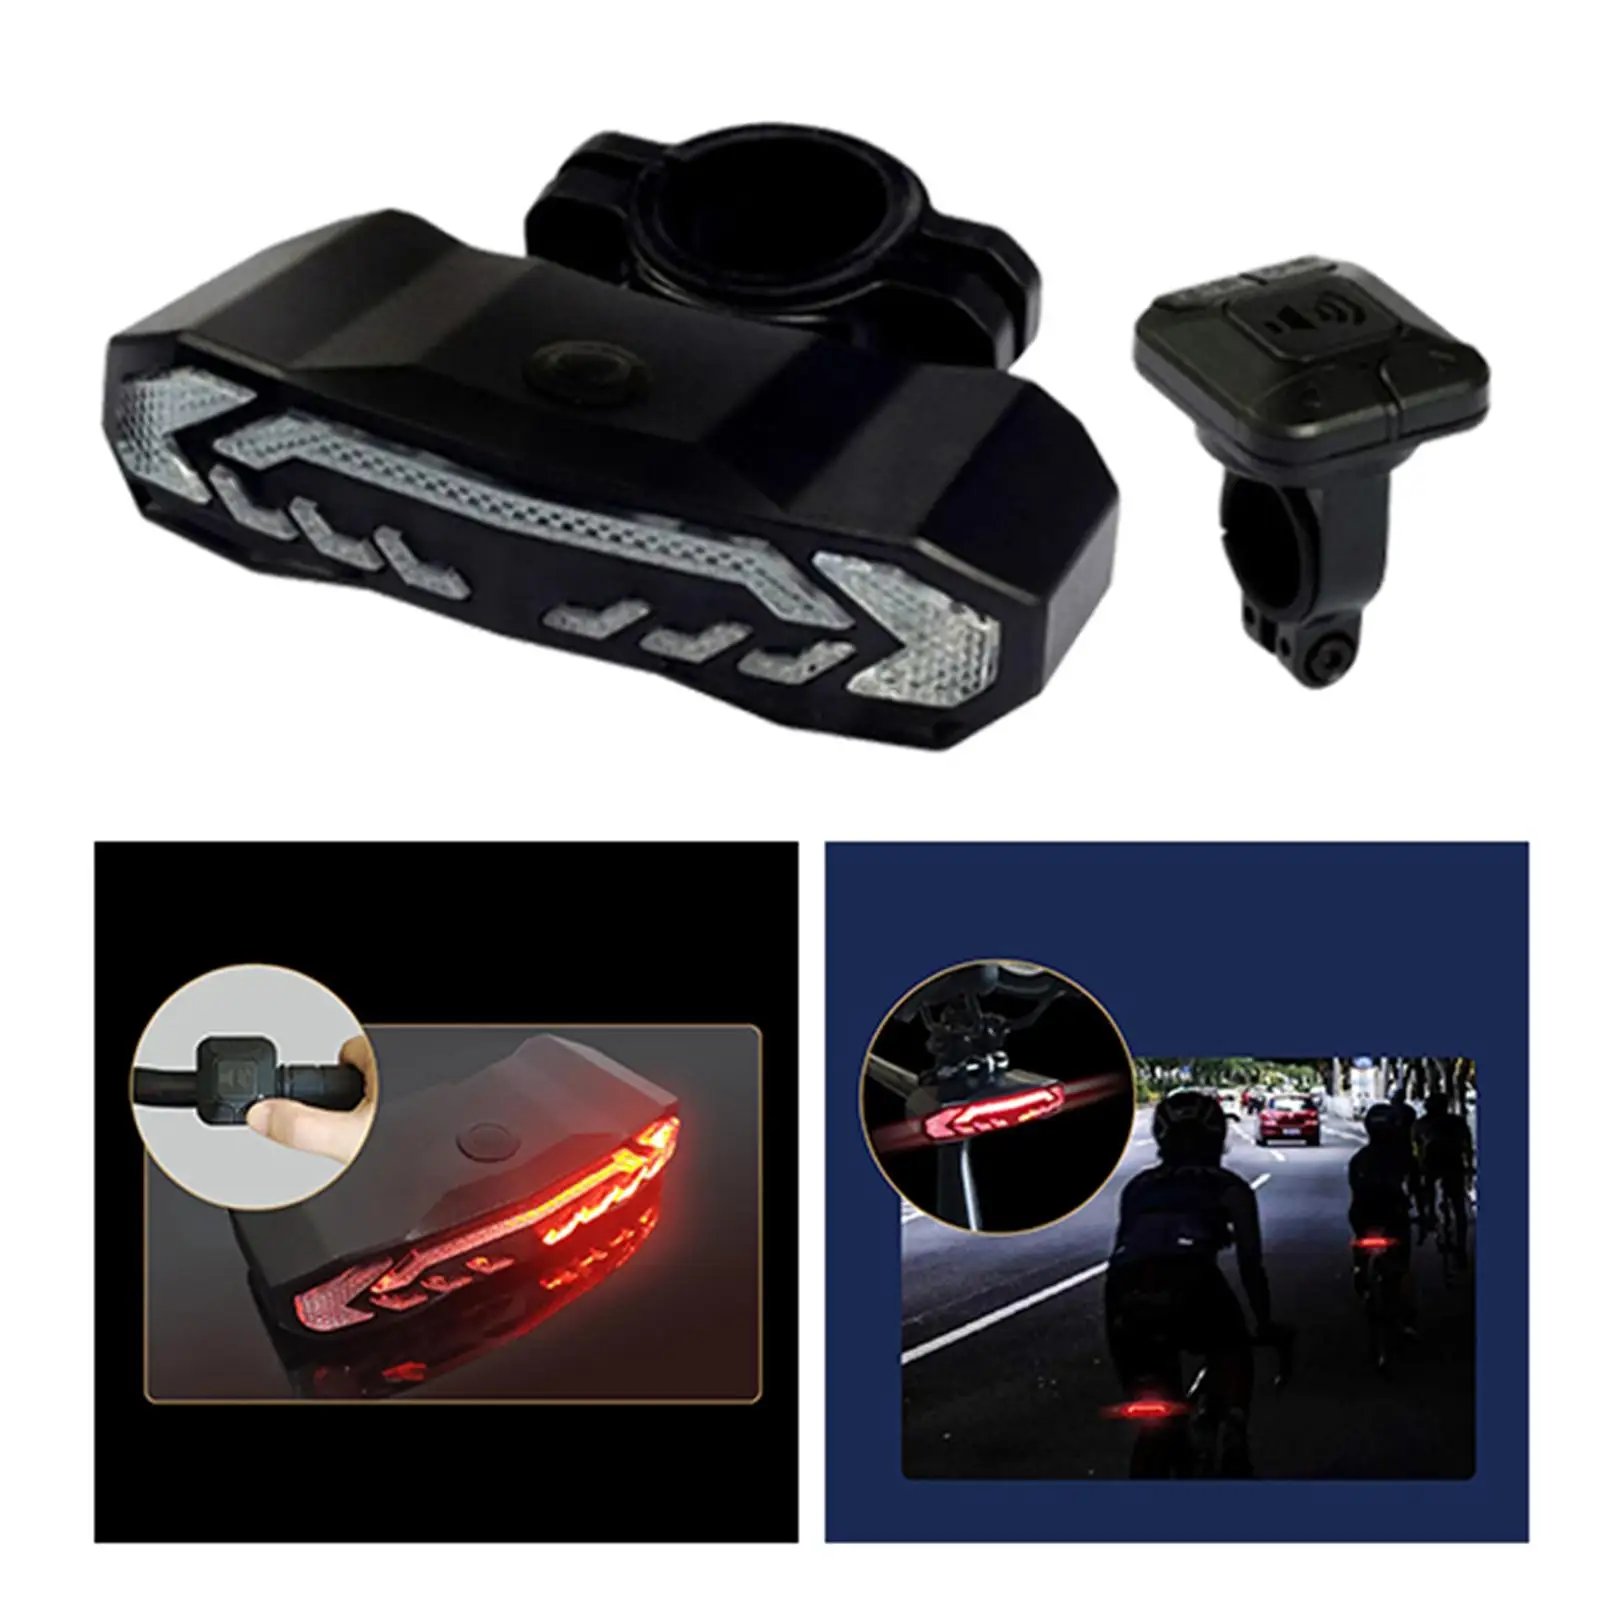  Light Anti Theft  Back Safety Warning  Road Night Cycling with Remote Control 6Modes